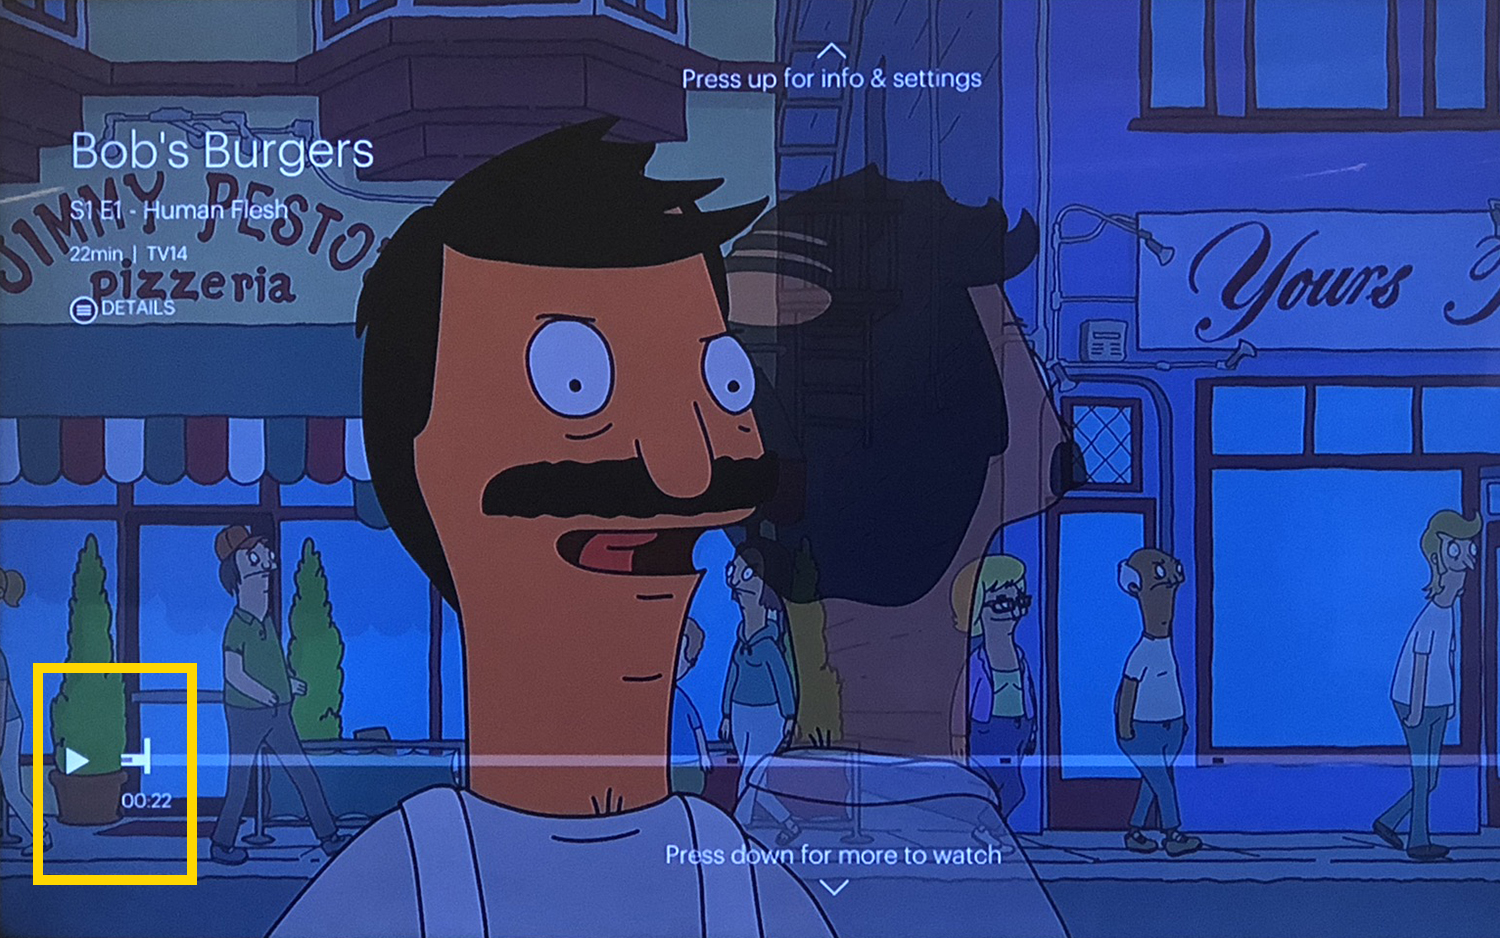 The Fire TV Stick interface paused in a Bob's Burgers episode